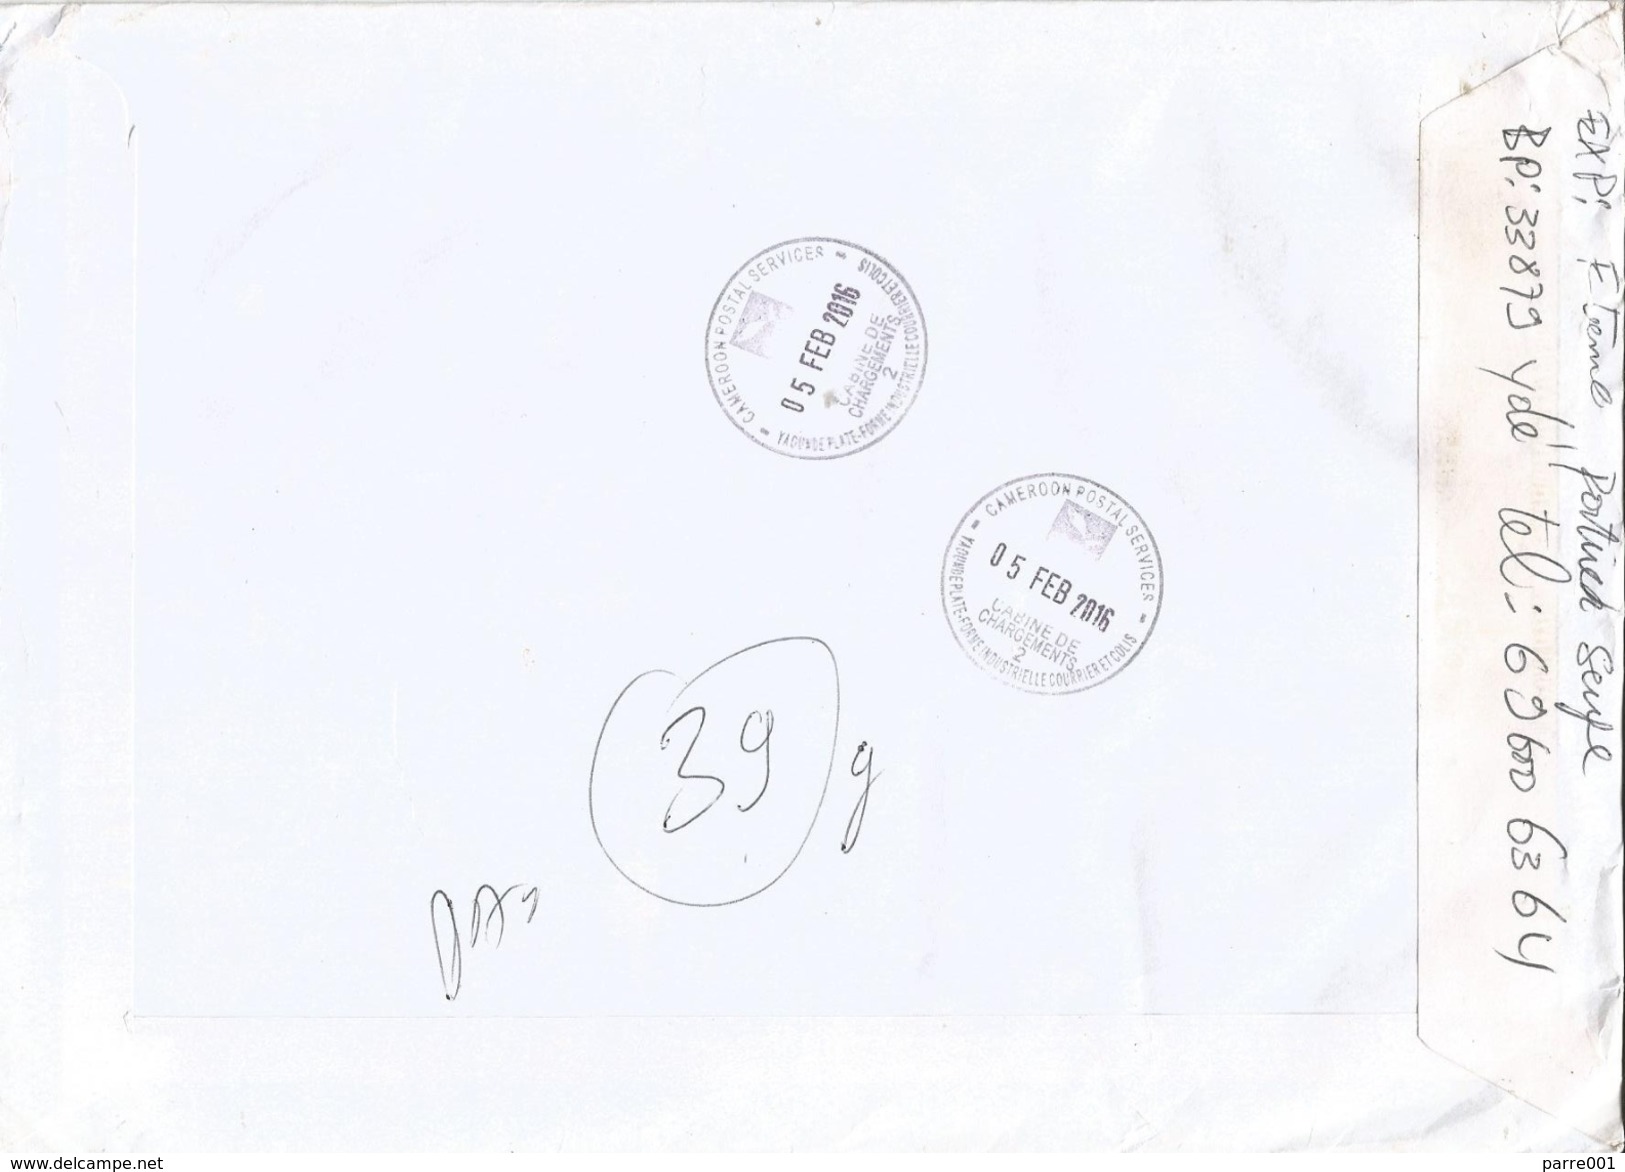 Cameroon Cameroun 2016 Yaounde Gare Kribi Deepsea Harbour Buea Monument Barcoded Registered Cover - Kameroen (1960-...)